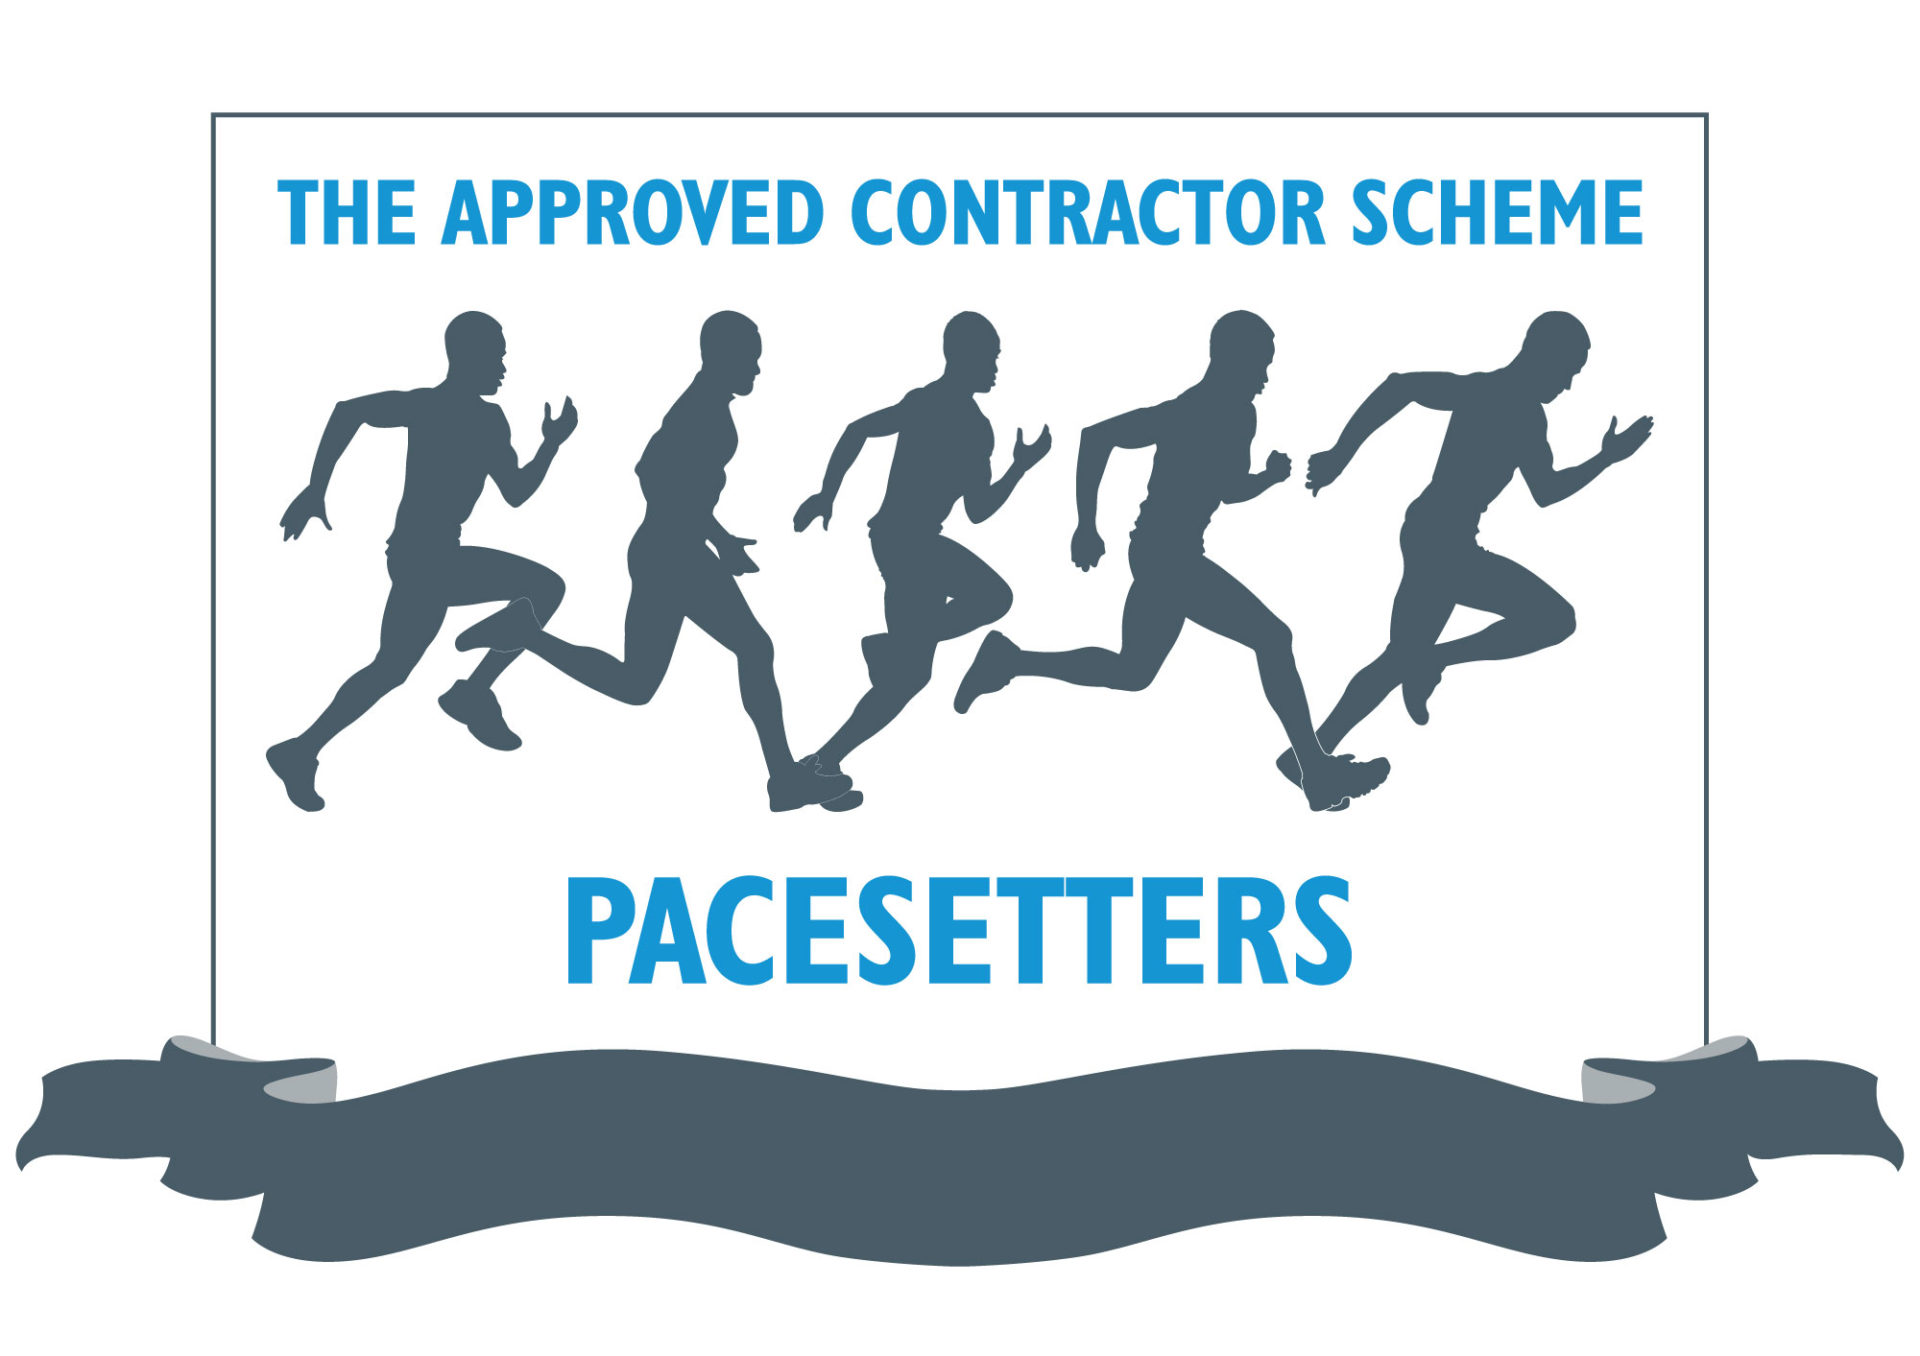 the approved contractor scheme - pacesetters